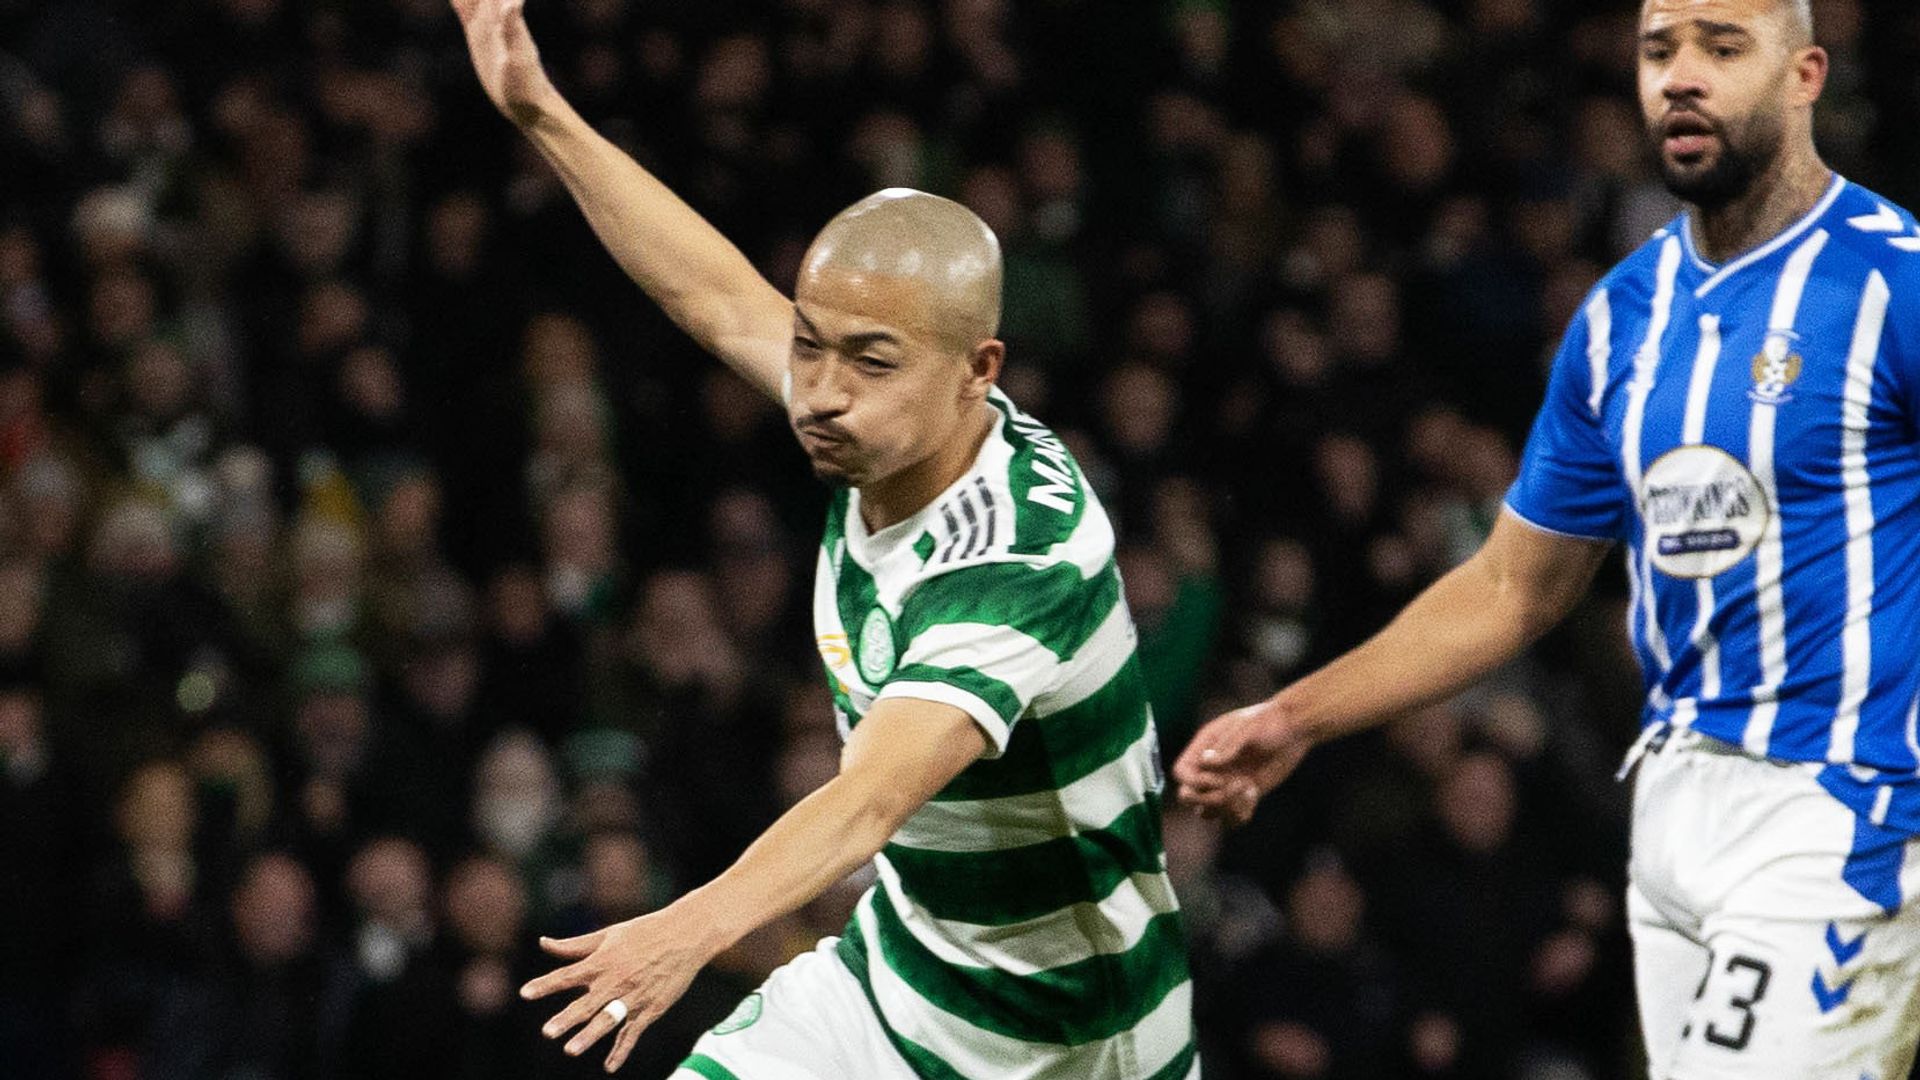 Holders Celtic beat Kilmarnock to reach Scottish League Cup final